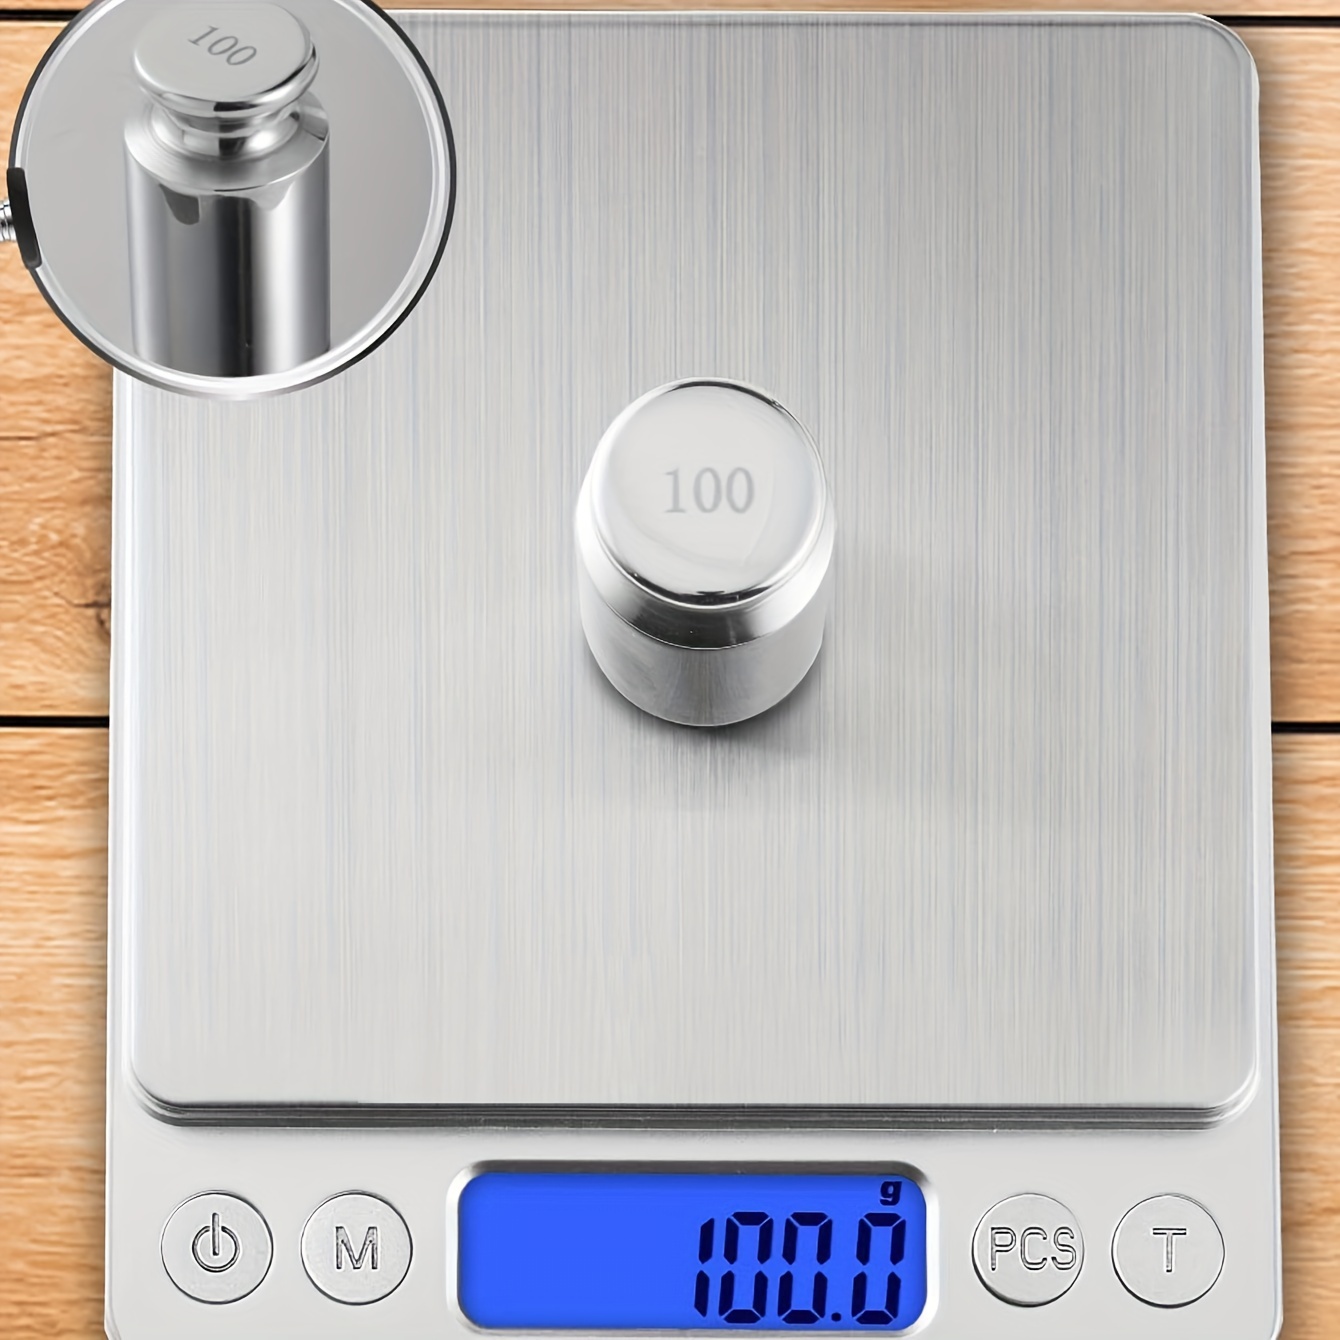 Food Scales, Digital Kitchen Scales For Food Ounces And Grams